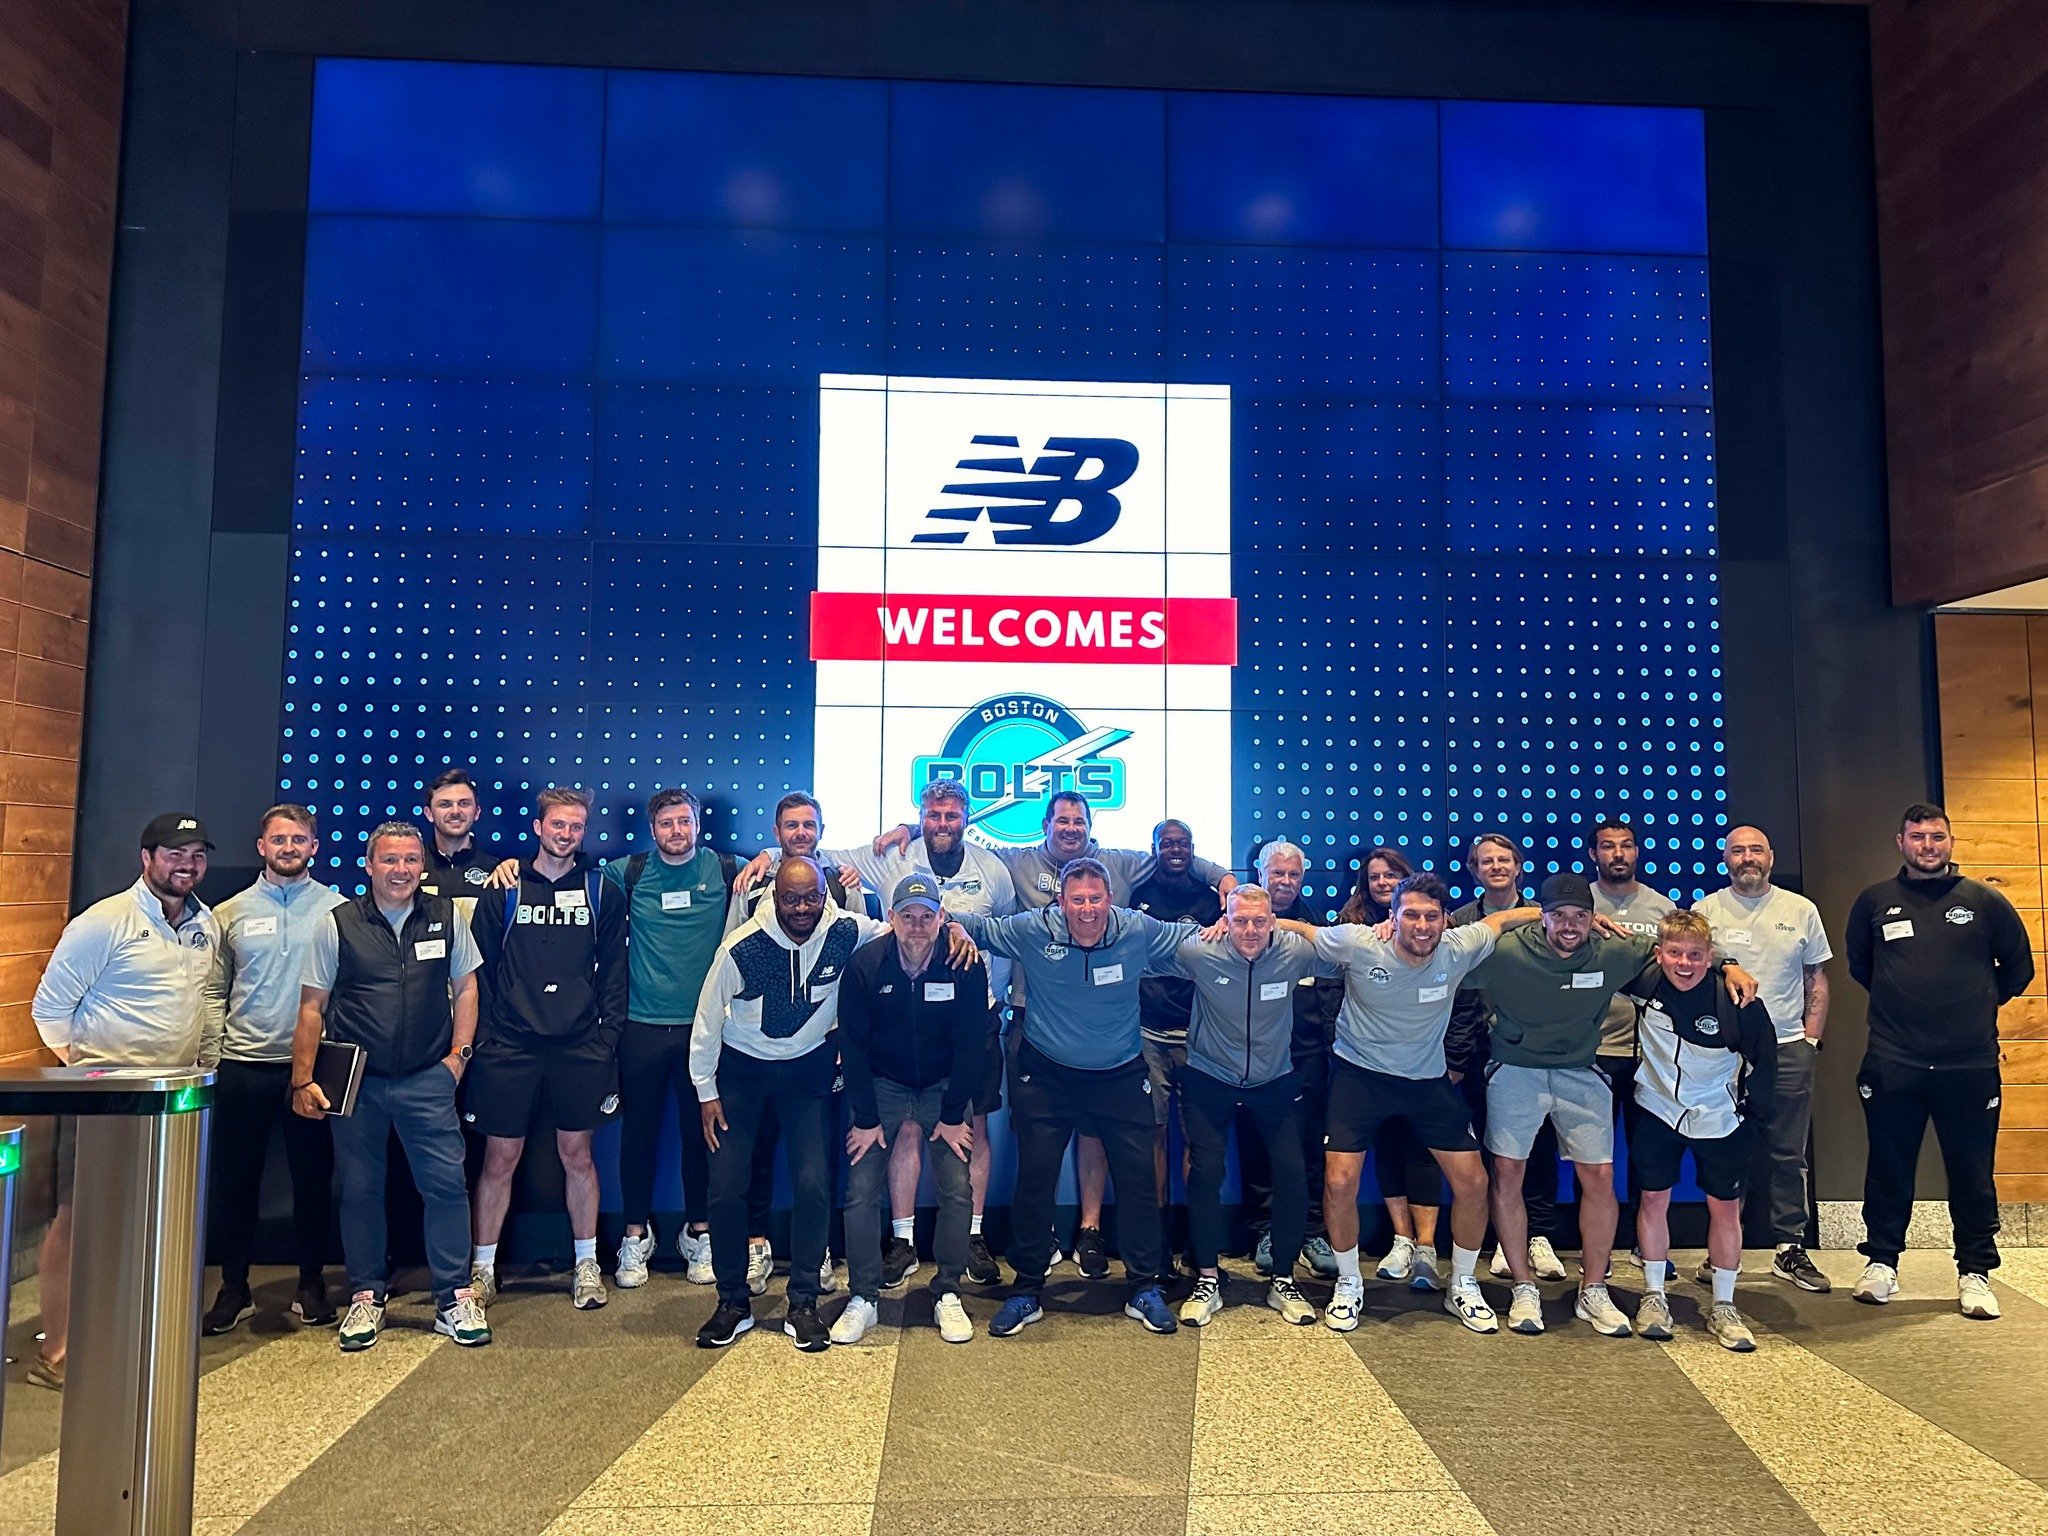 Thank you @newbalance for hosting us at your amazing headquarters at Boston Landing in Brighton, MA for a wonderful staff day! 

Lots of learning taking place throughout the day as our full-time staff members continued to work towards providing the b